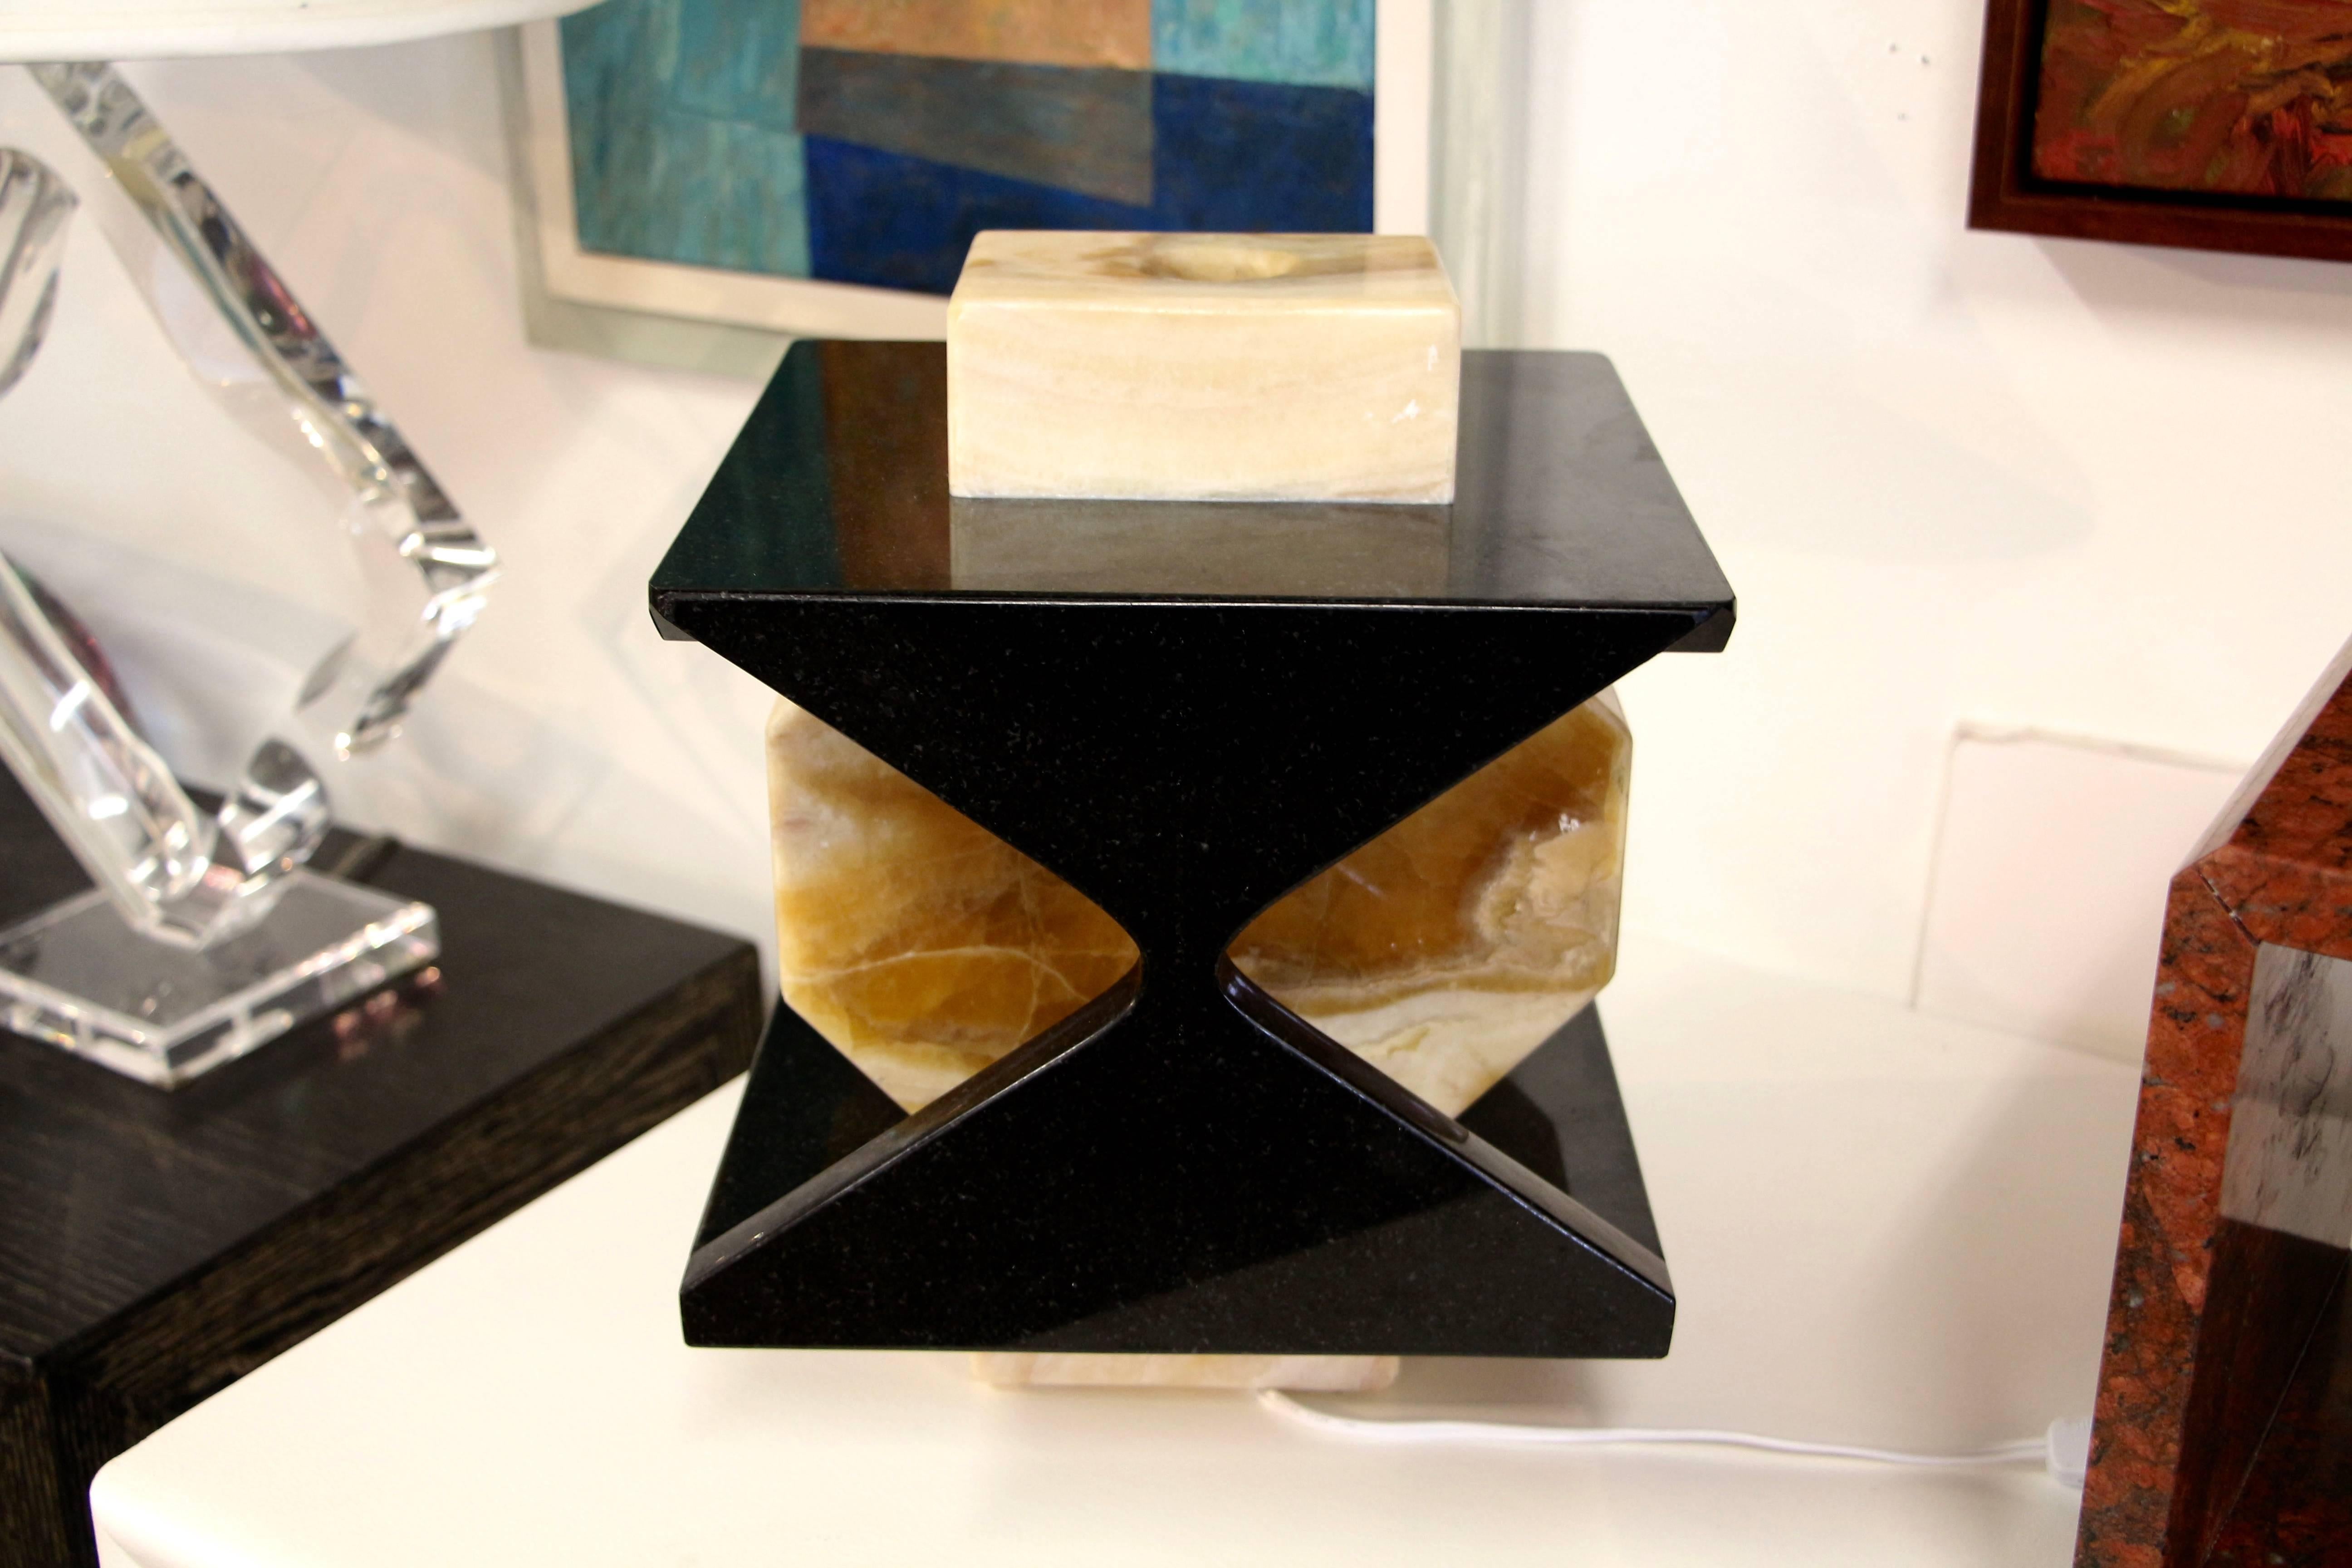 We recently started buying from a local artist Carlos Gaona, who is wonderfully talented. This lamp is a one-of-a-kind piece and is quite lovely. It is a nicely colored onyx and granite. New wiring of course.